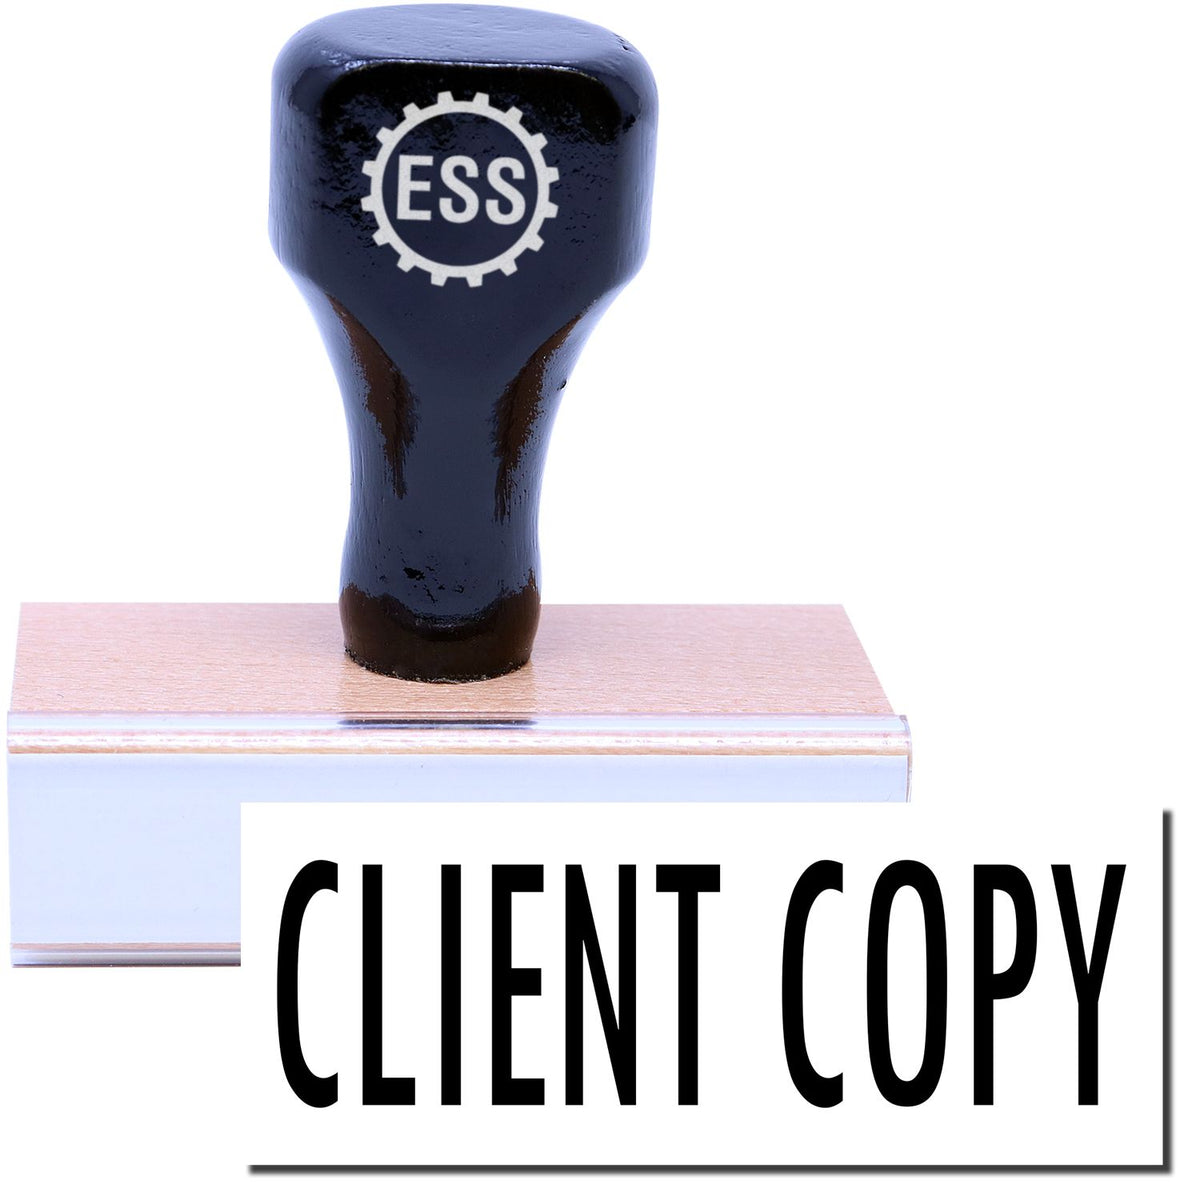 A stock office rubber stamp with a stamped image showing how the text &quot;CLIENT COPY&quot; in a large font is displayed after stamping.